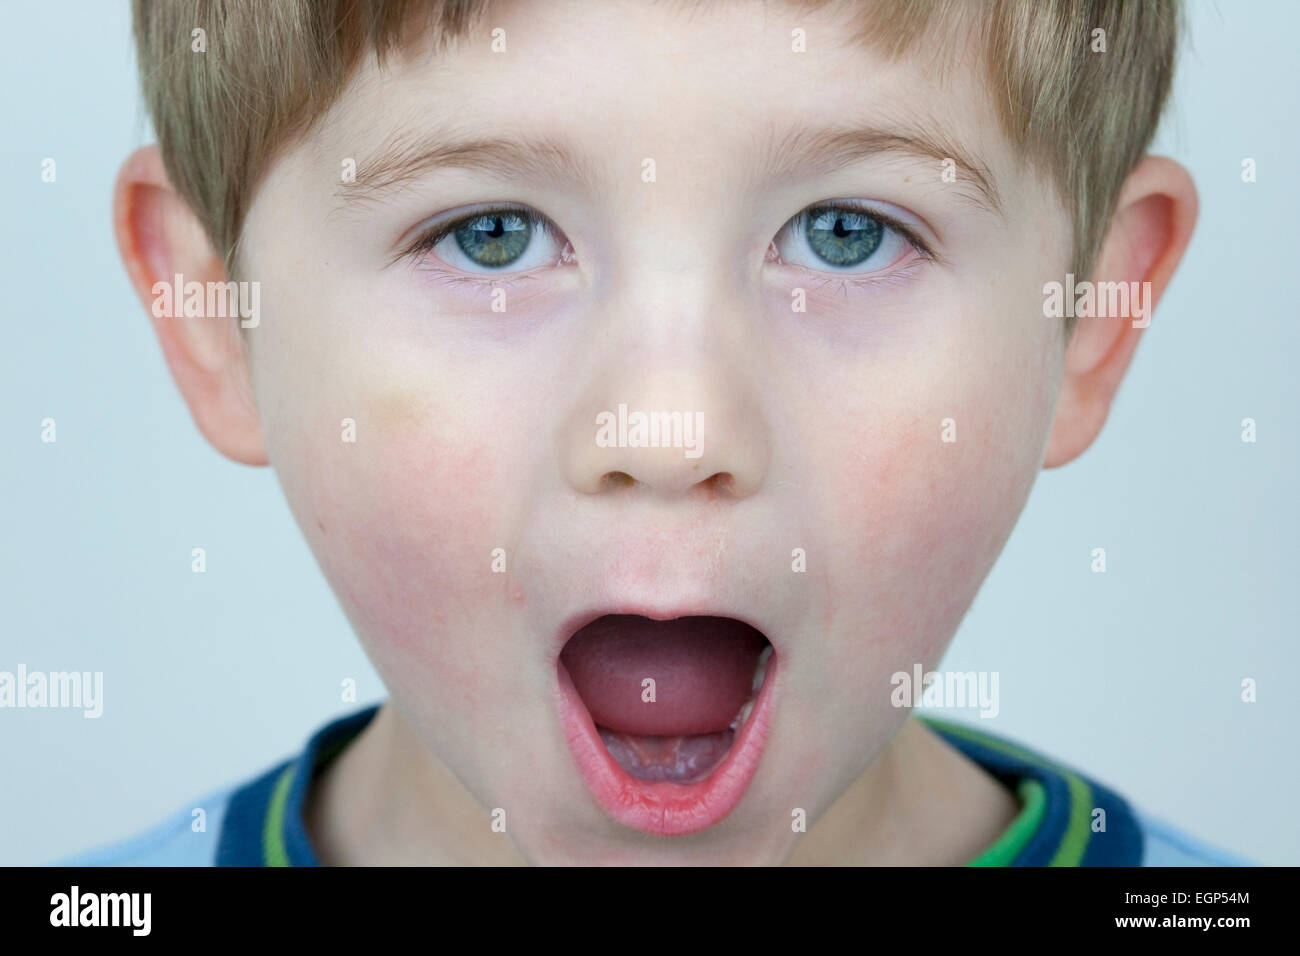 5 year old boy face shots close up Open mouthed expression Stock Photo